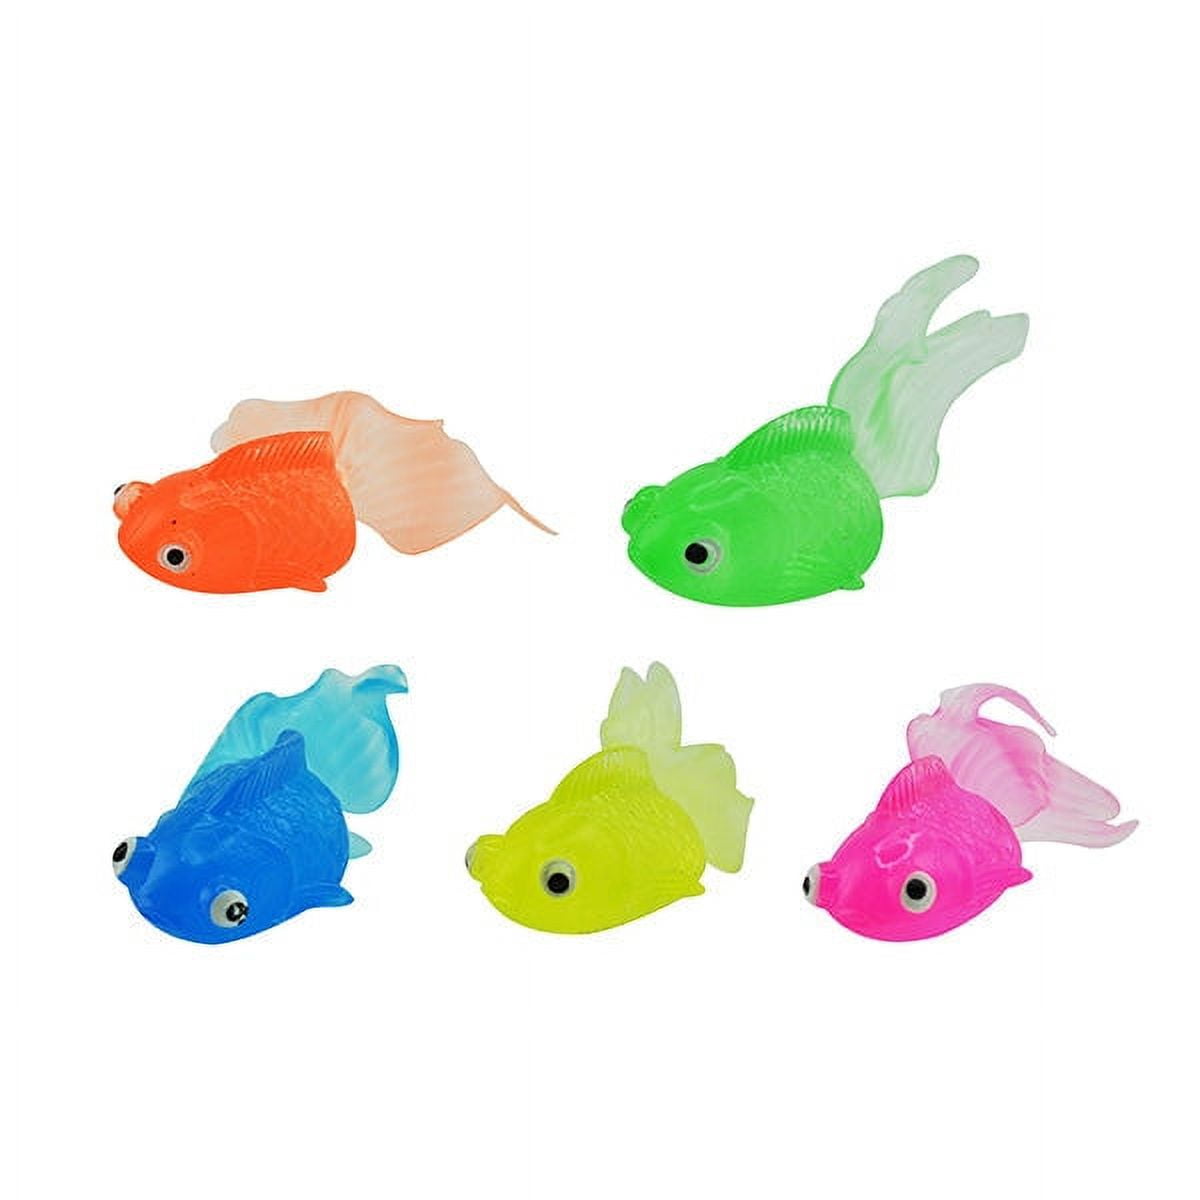 Small Neon Rubber Fish Toys - Pack of 12 